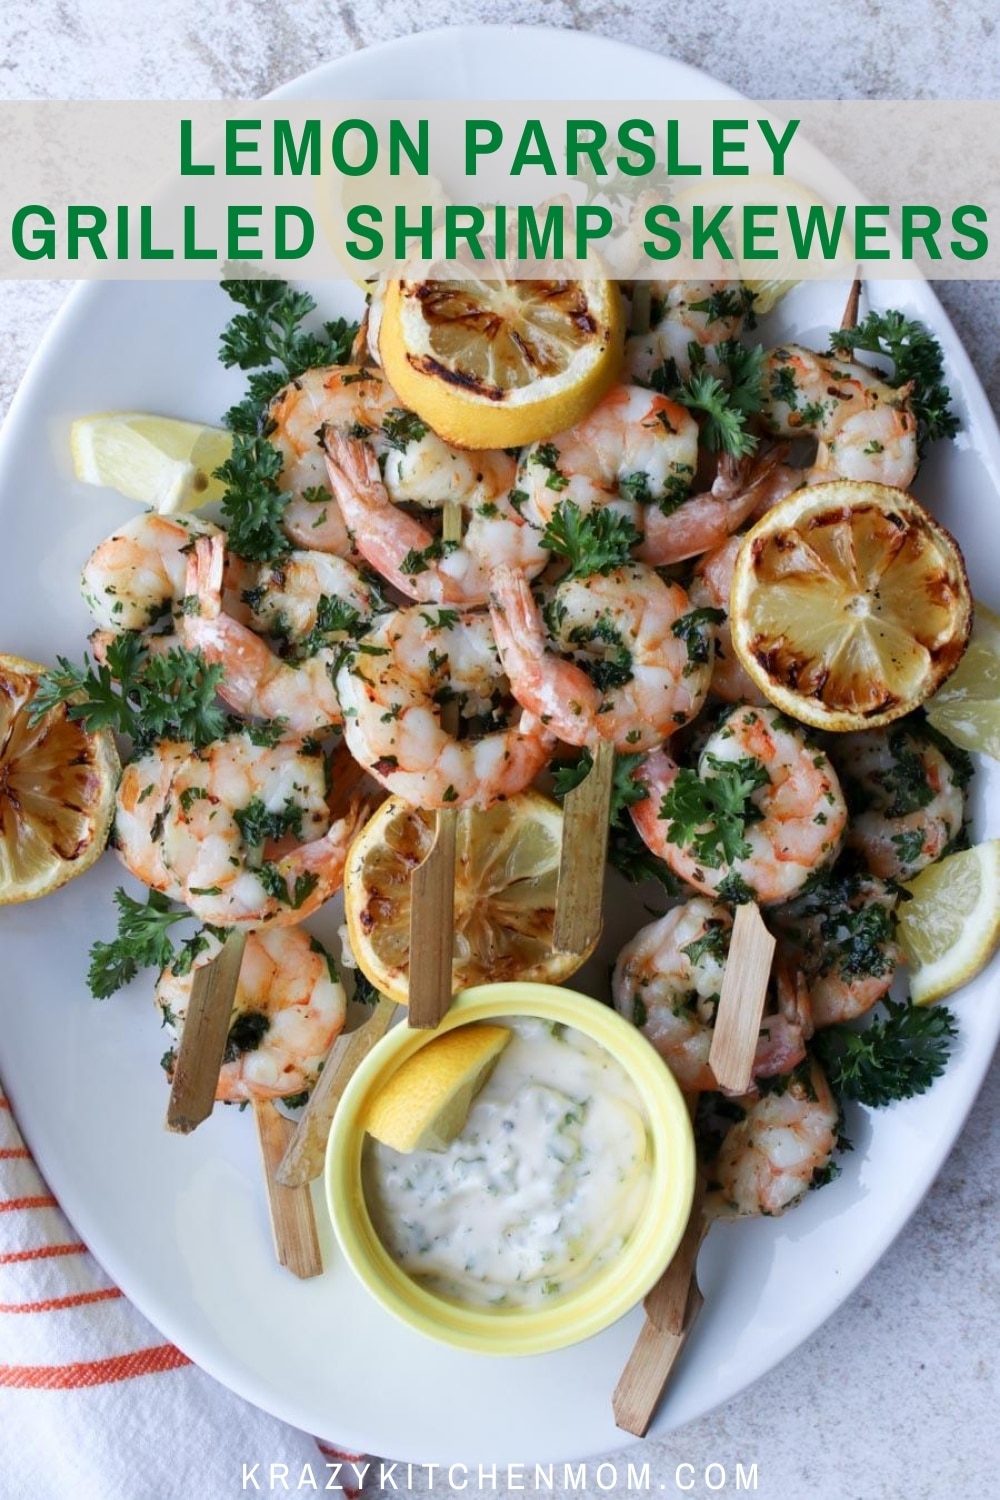 Juicy, crispy, lemony, herb quick-cooking grill shrimp is an easy weekend night or weekend meal. Serve them as an appetizer or a main meal. Ready is less than 6 minutes. Ready is less than 6 minutes. via @krazykitchenmom